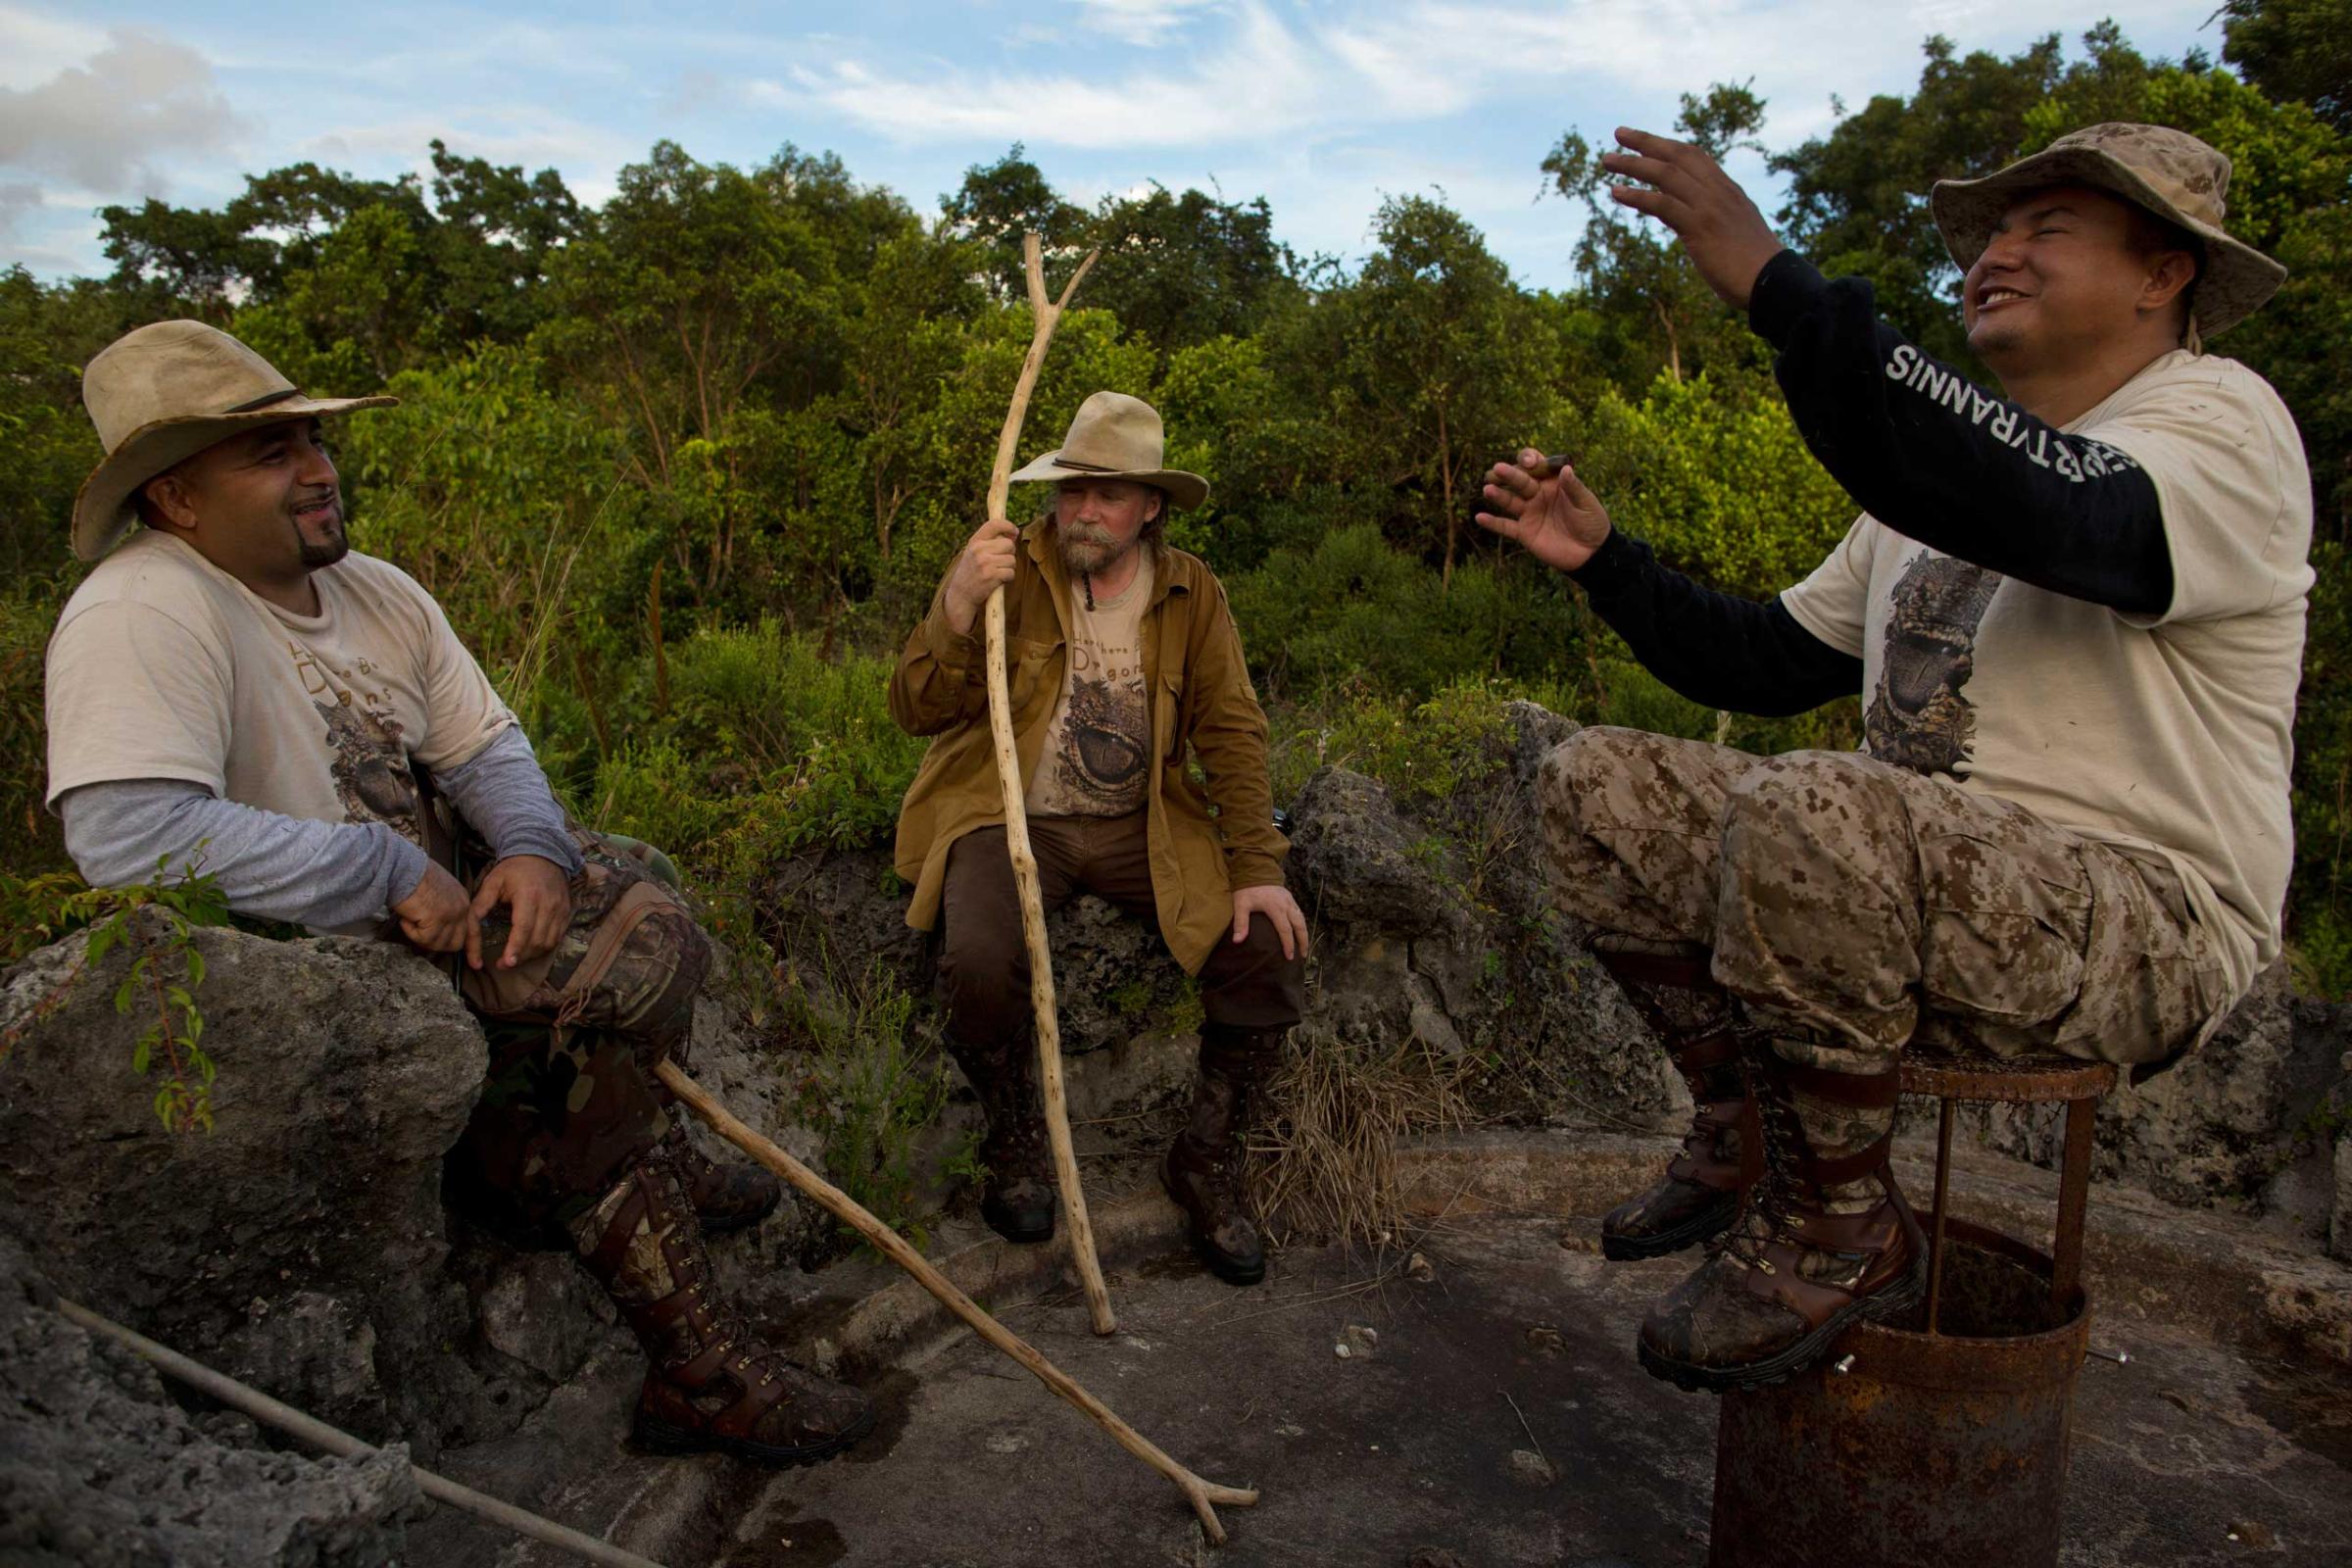 Members of the "Swamp Apes" rest and tell stories on an abandoned hot spring fountain during a patrol through Florida's Everglades National Park searching for invasive pythons in the Chekika area of the park on Saturday Oct. 4, 2014. From left to right are founder of the "Swamp Apes" Tom Rahill, center, and veteran and volunteer with the group Jorge Martinez, left, and Jose Rodriguez, right. David Guttenfelder for TIME)